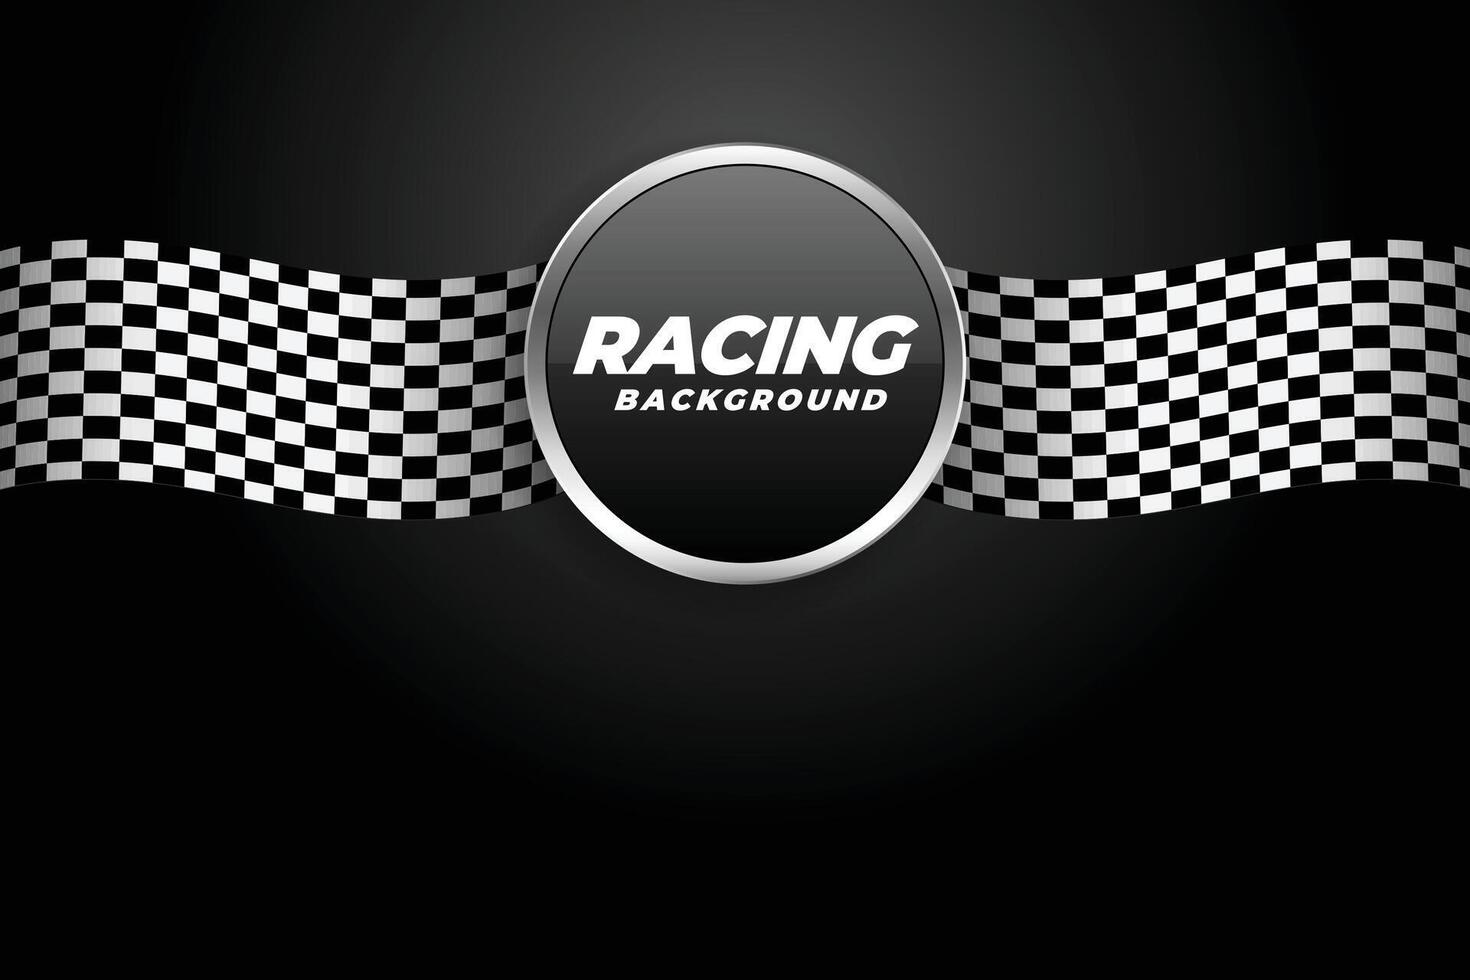 racing background with checkered flags vector